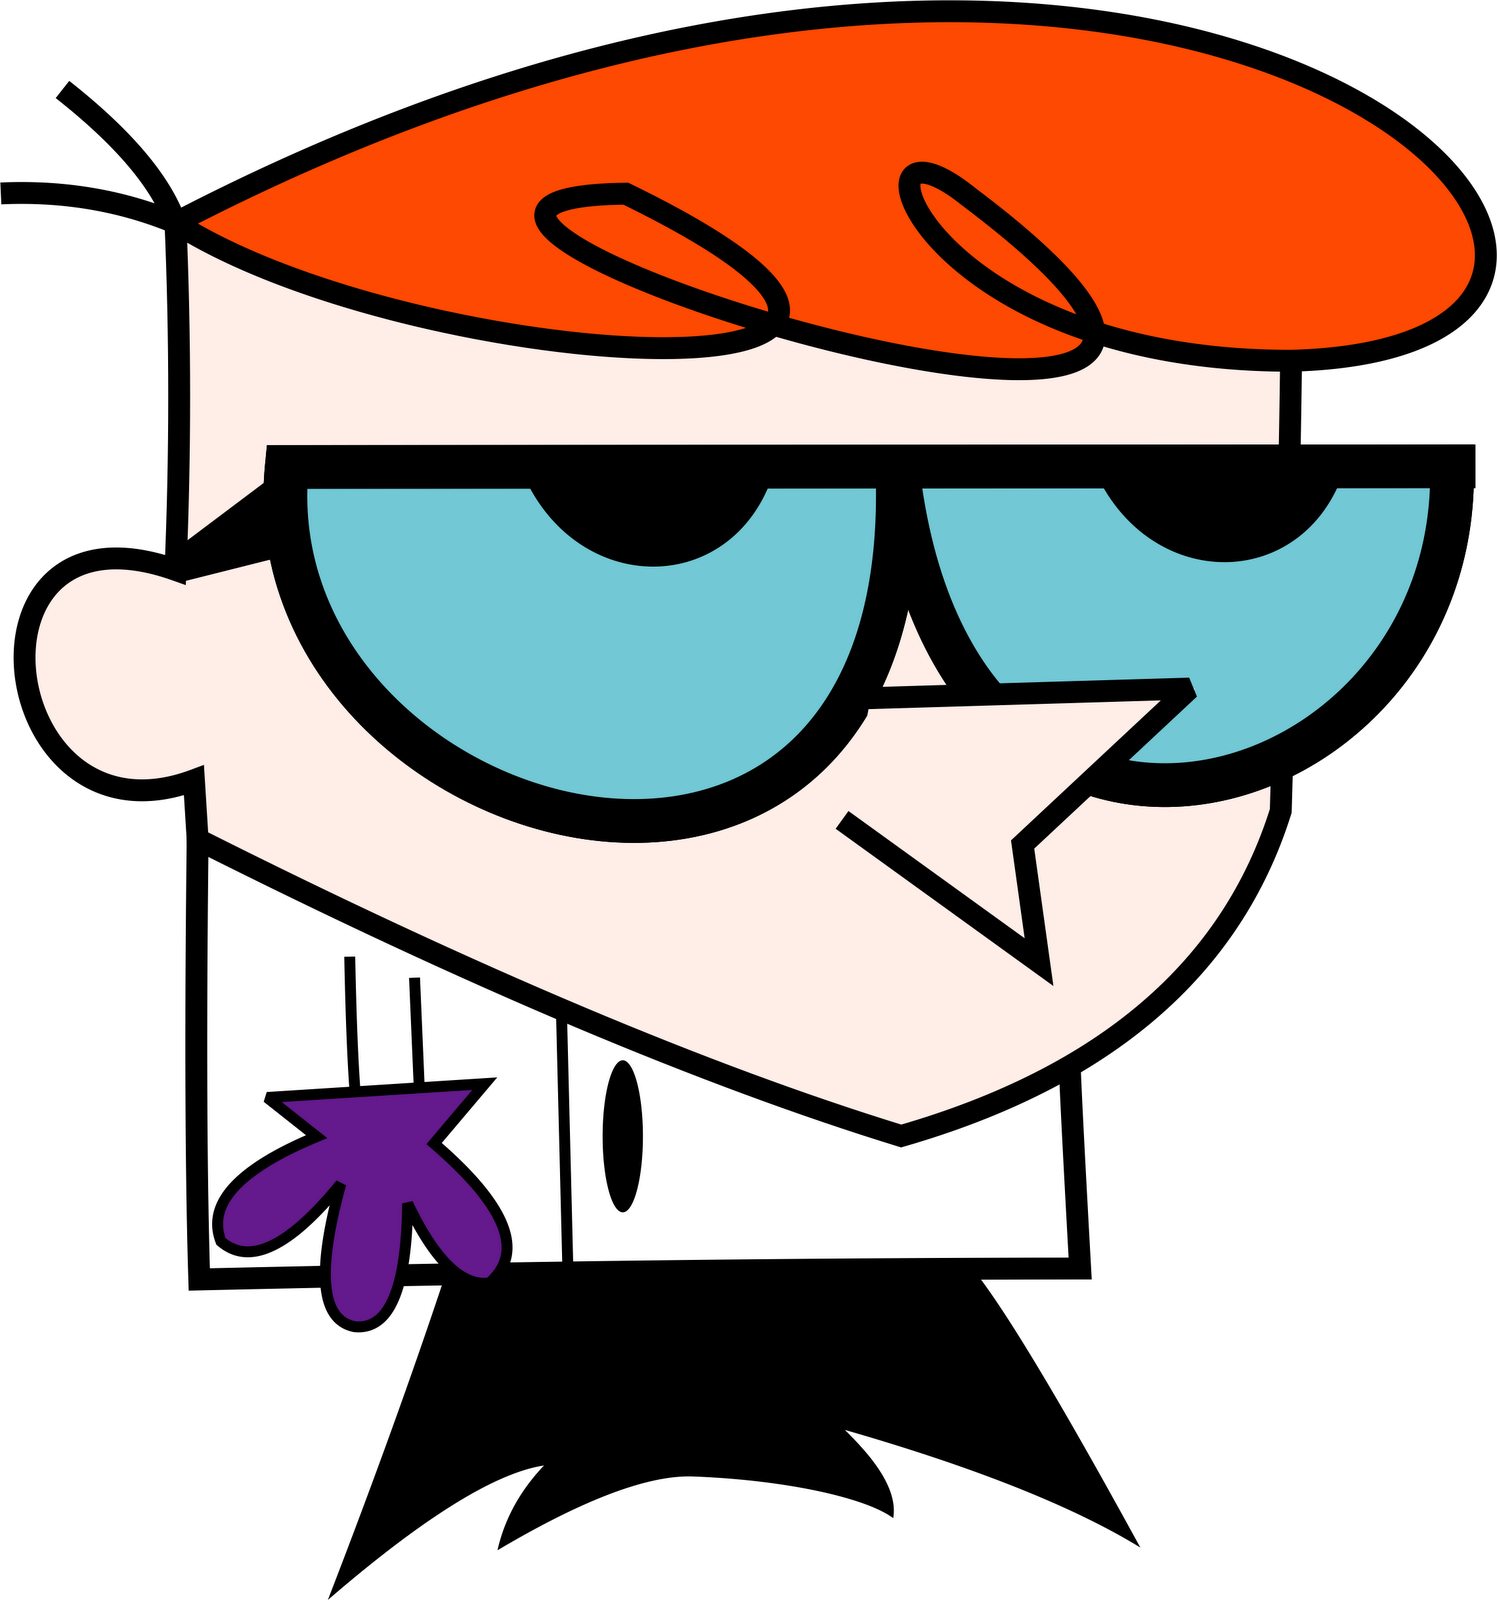 Dexters Laboratory HD Wallpapers High Definition iPhone HD